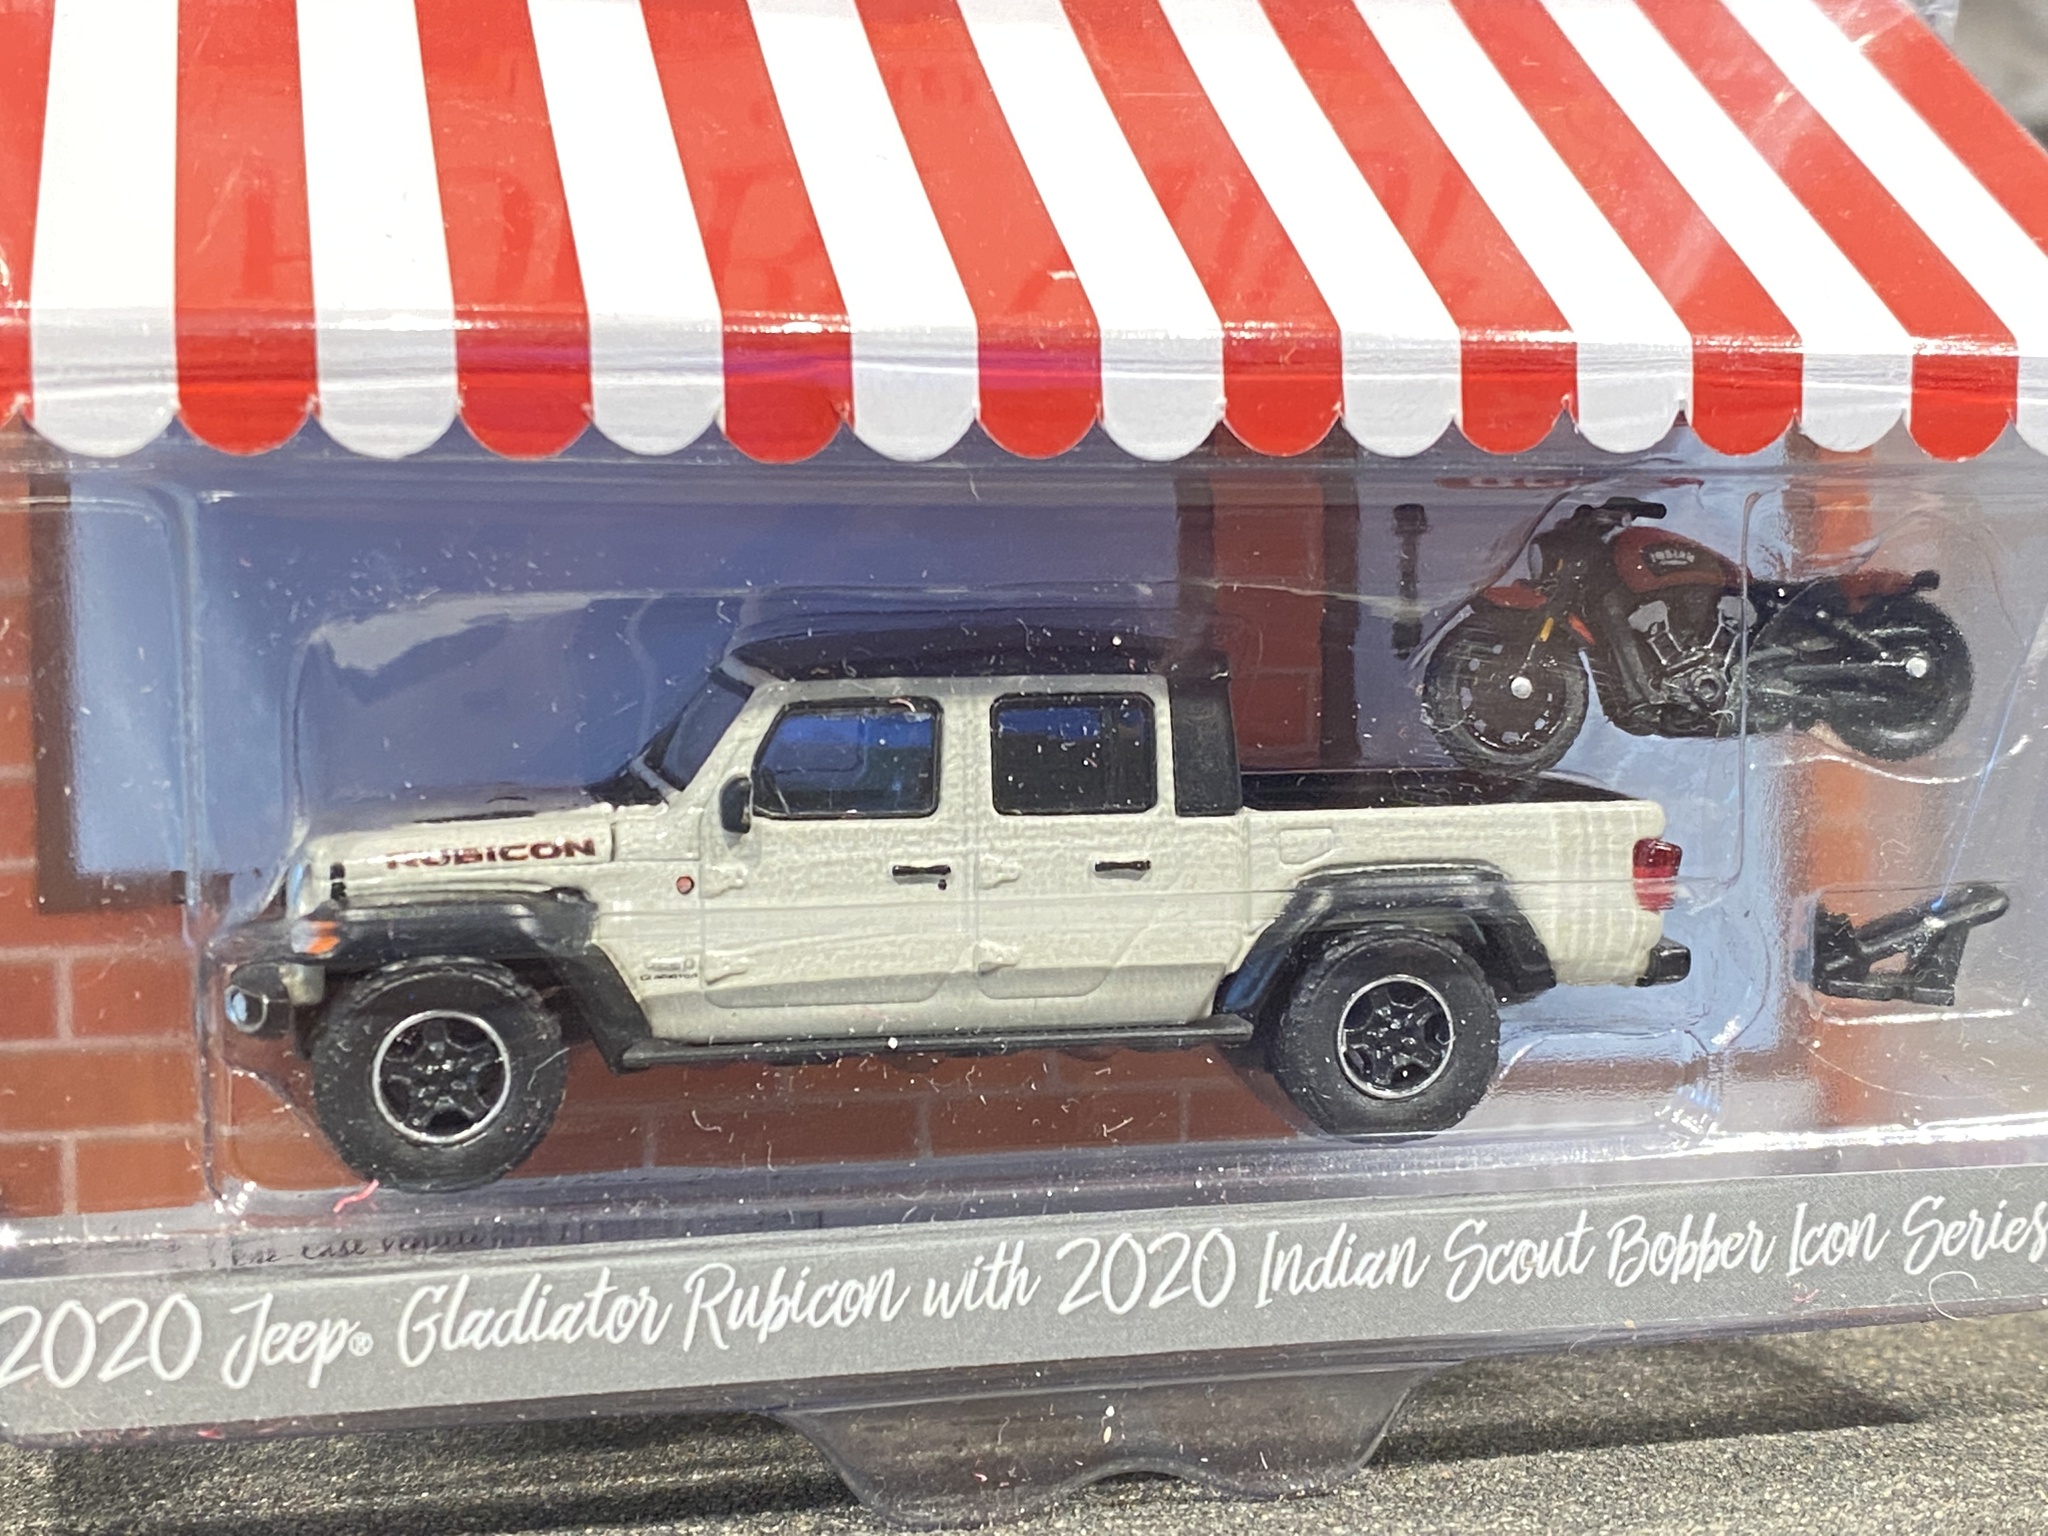 Skala 1/64 Jeep Gladiator Rubicon + Indian Scout 20' "Hobby Shop" fr Greenlight